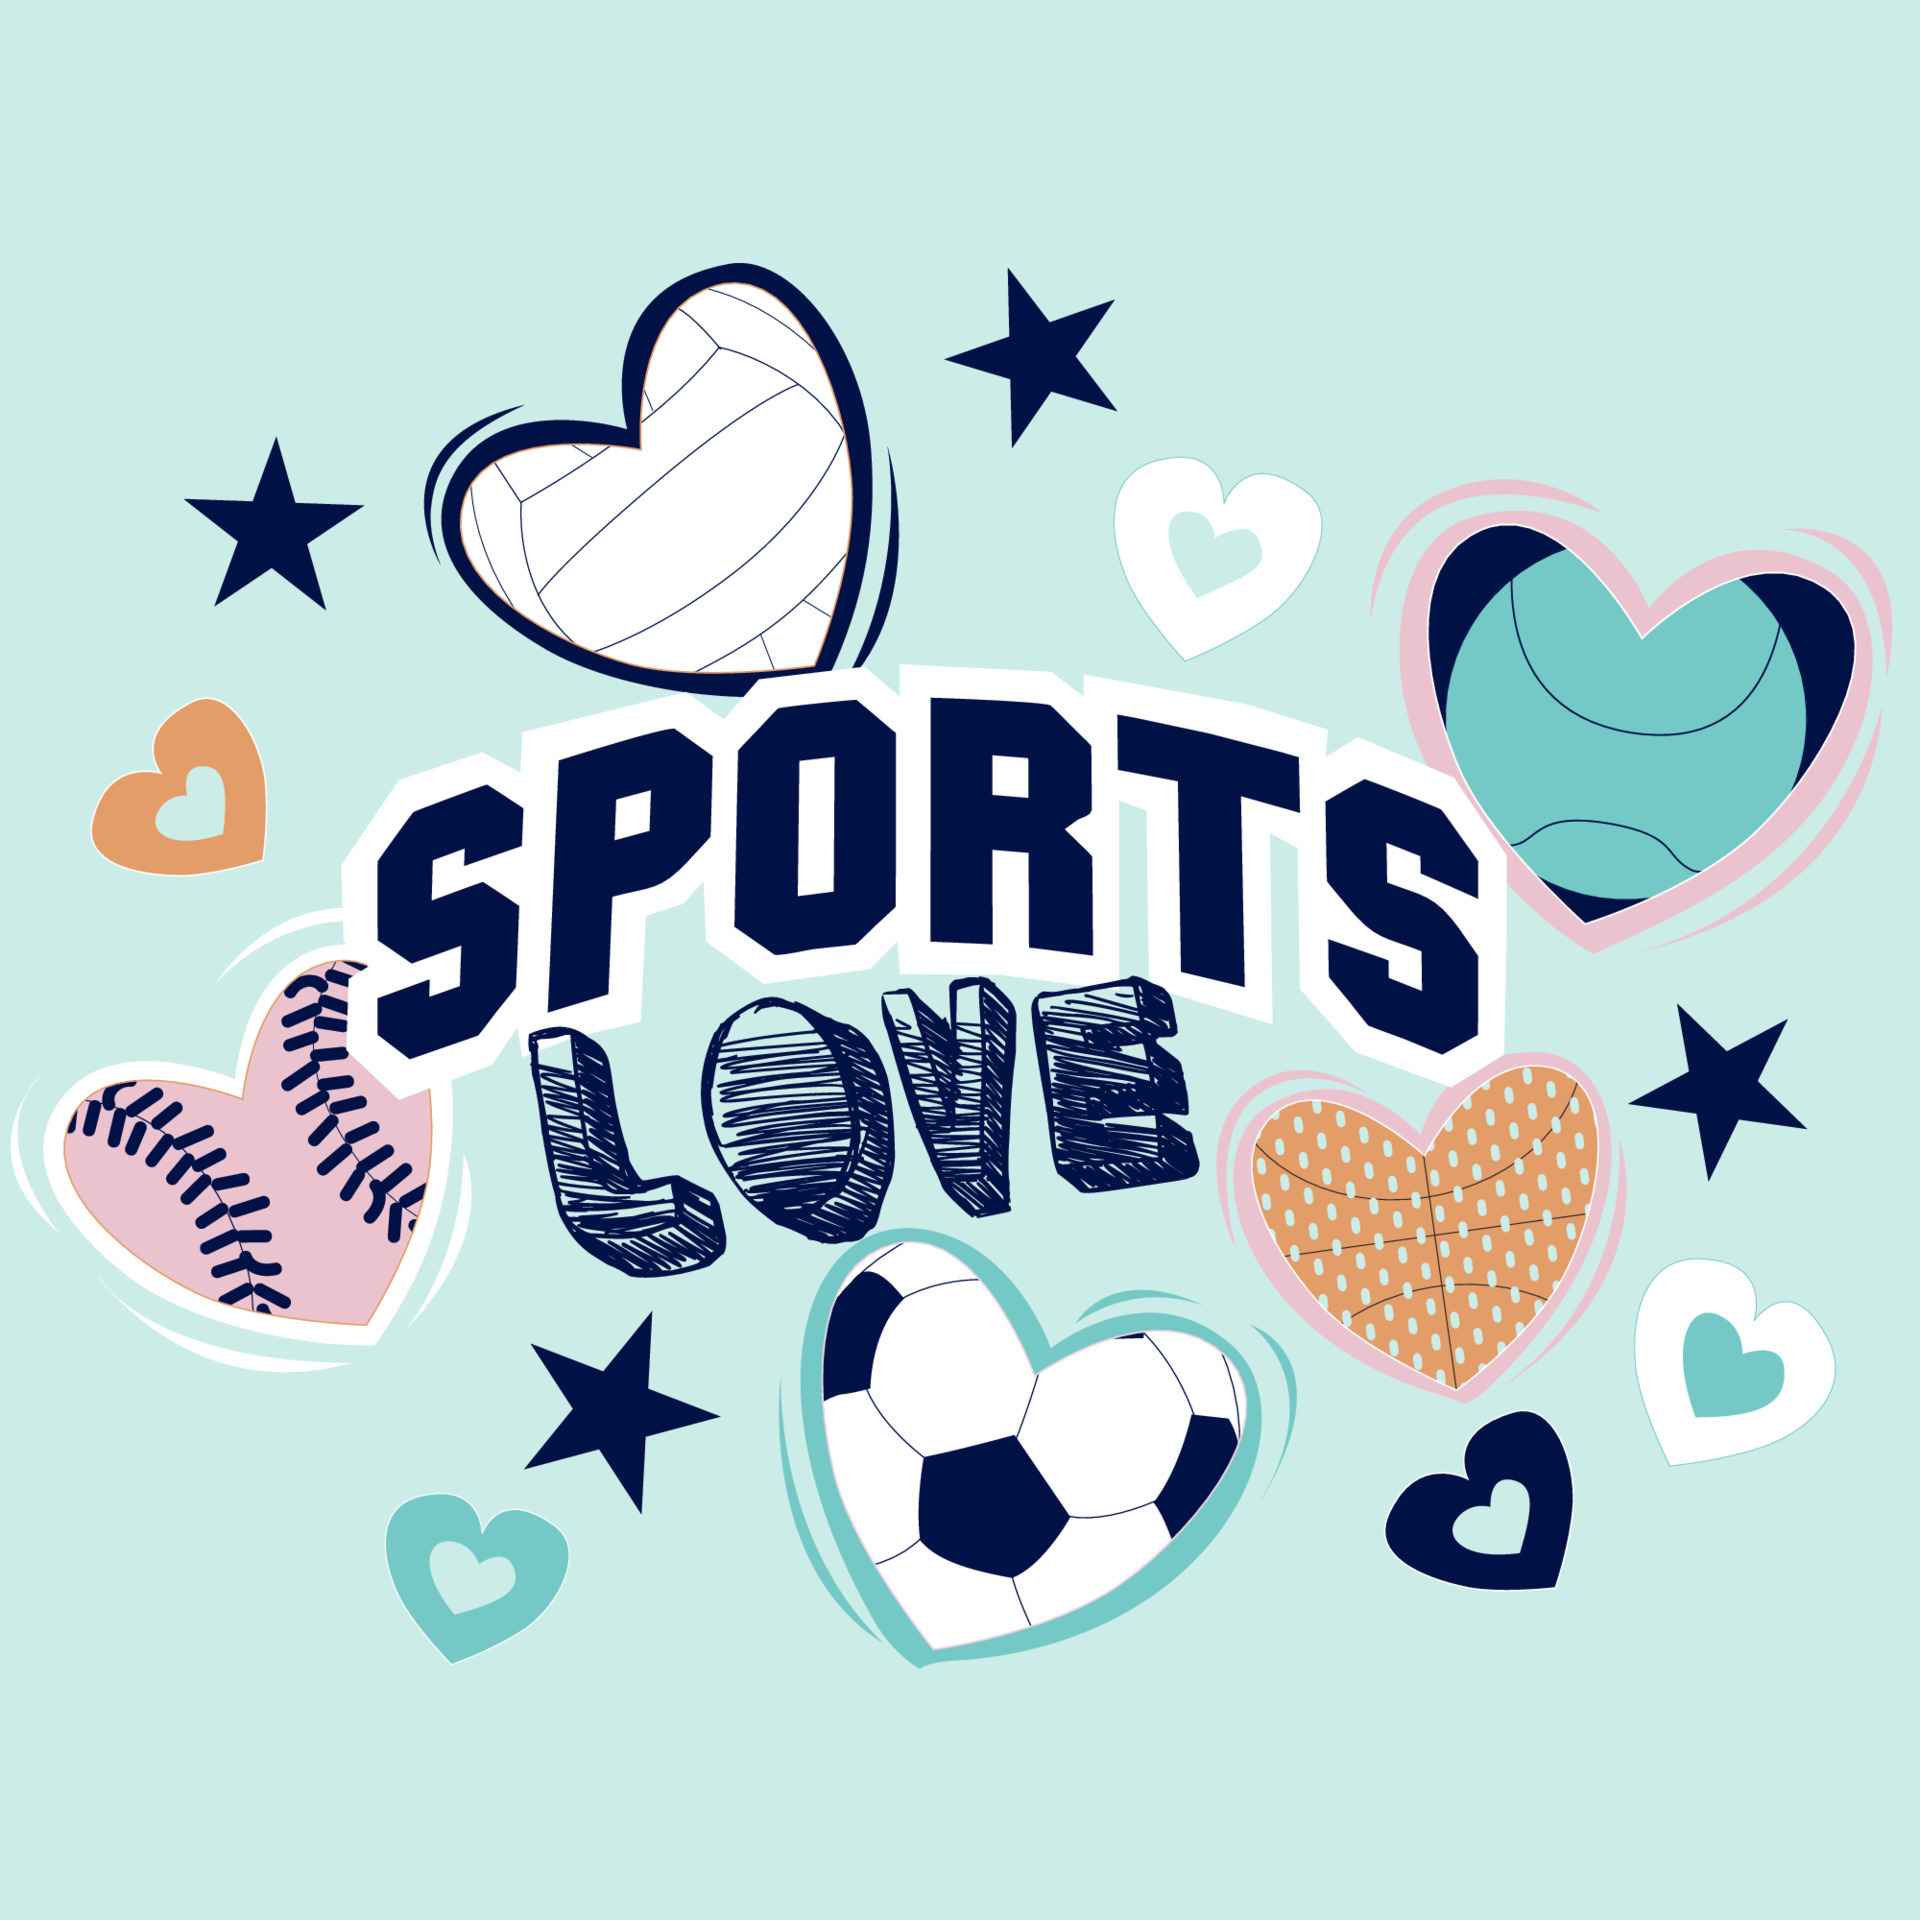 https://static.vecteezy.com/system/resources/previews/008/826/398/original/ball-game-with-hearts-sports-love-icon-vector.jpg